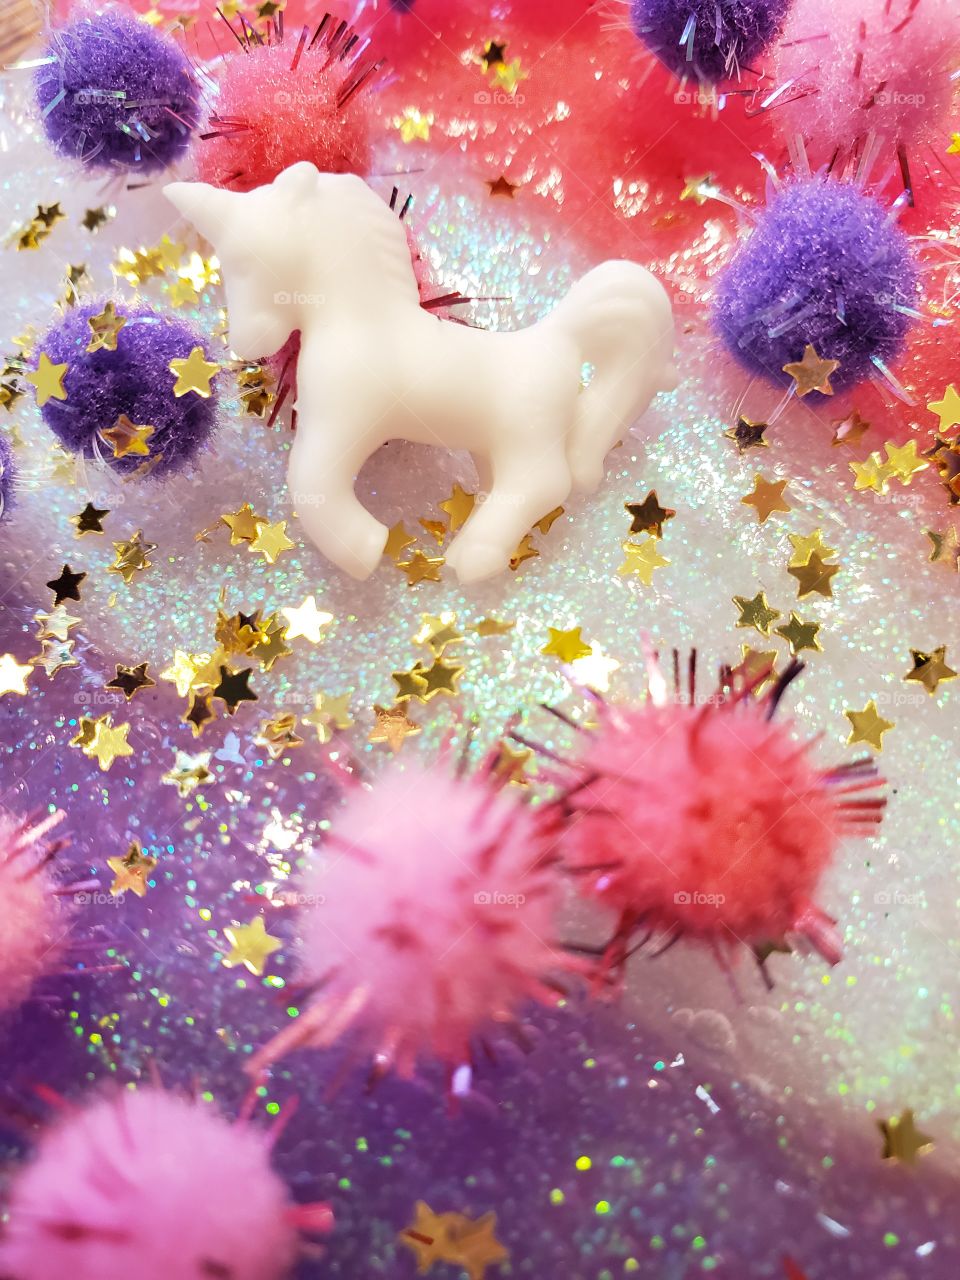 an intergalactic mystery unicorn party slime.